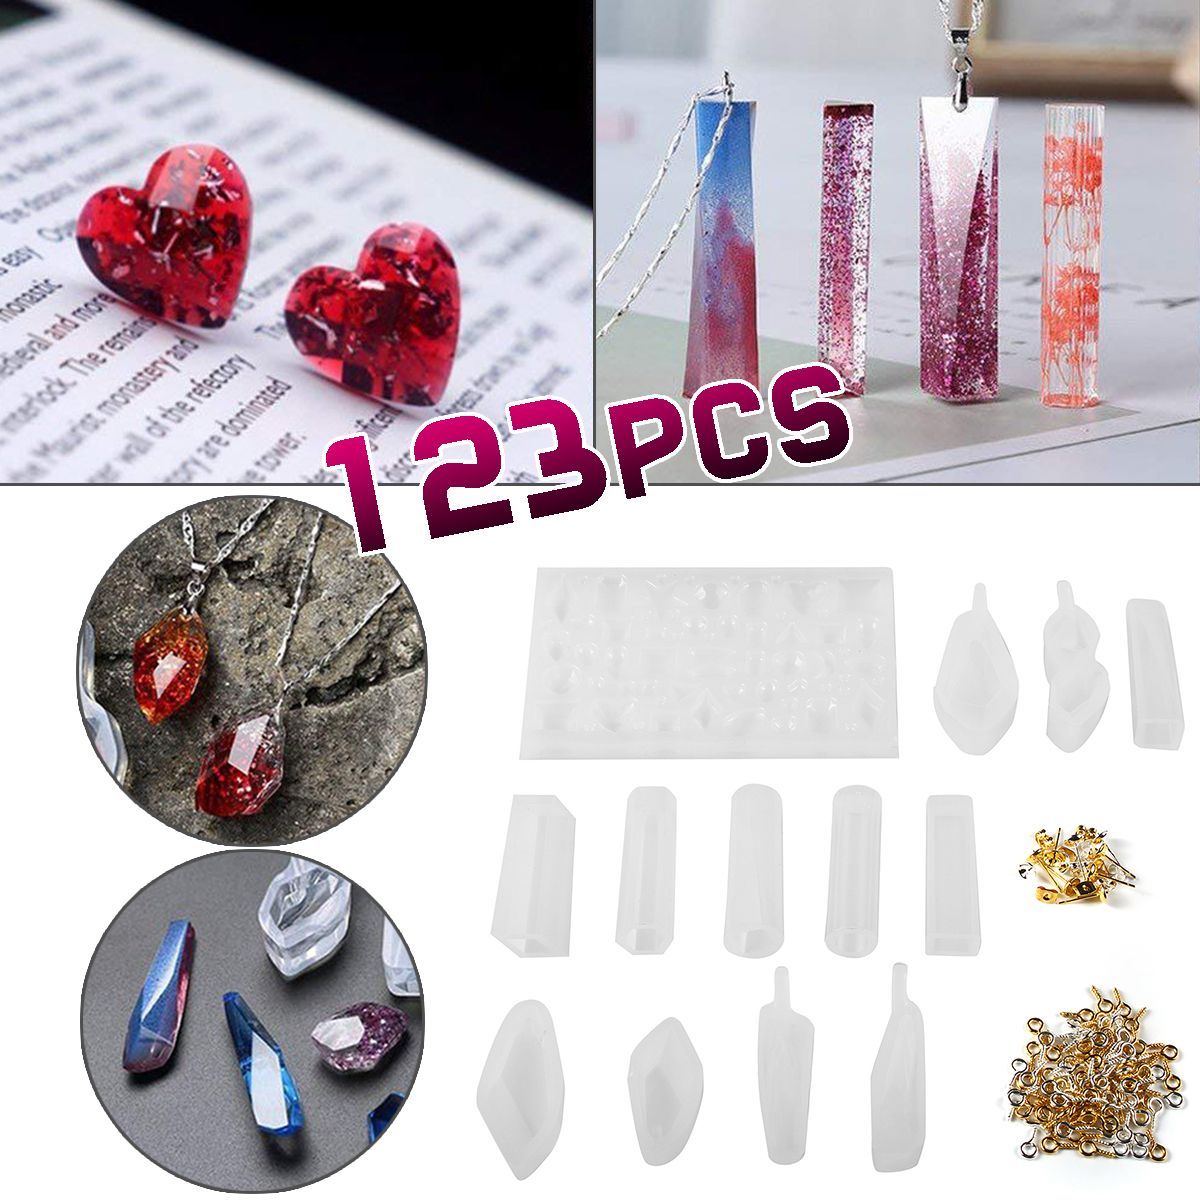 DIY-Resin-Casting-Molds-Silicone-Craft-Ears-Pendant-Chocolate-Making-Mould-Kit-1714217